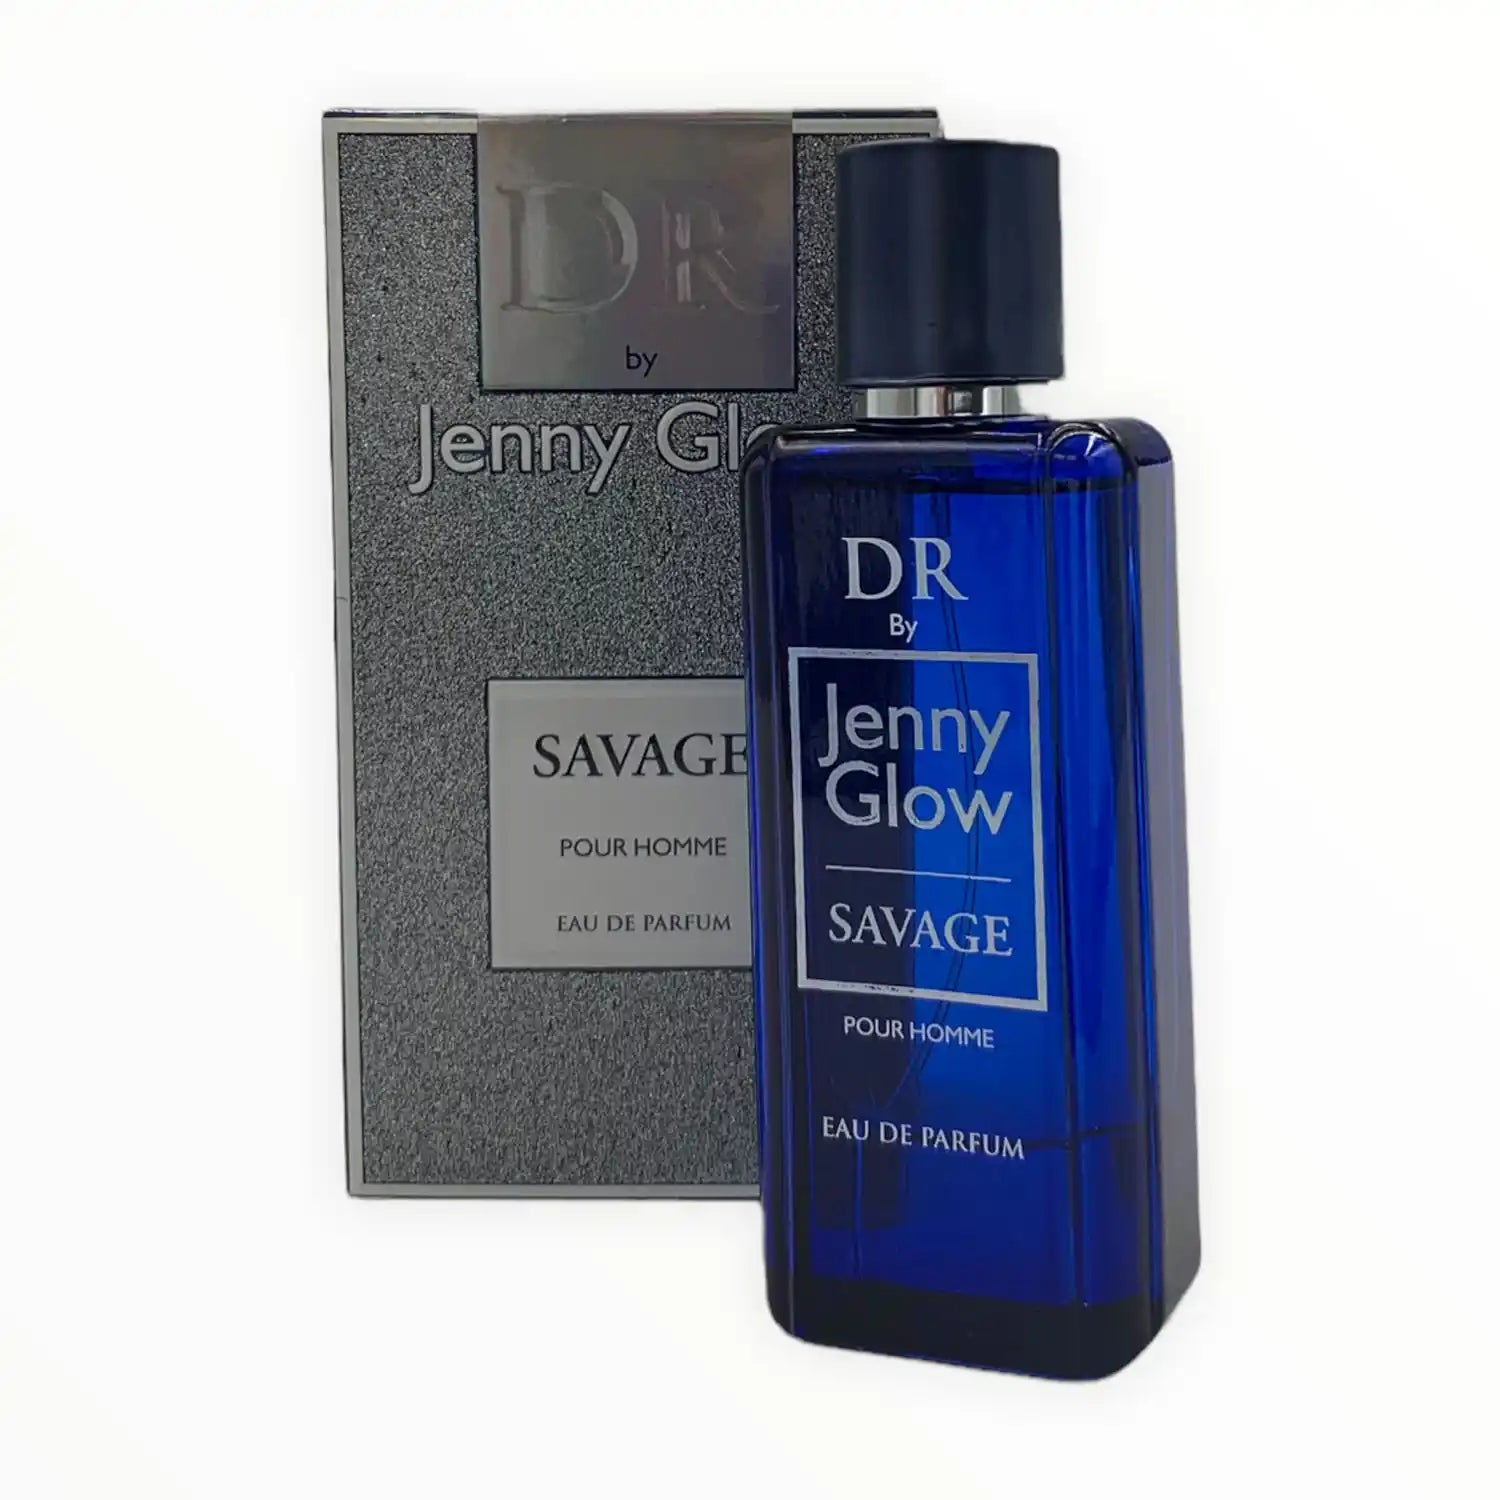 Jenny Glow DR by Jenny Glow Savage Pour Homme 50ml 1 Shaws Department Stores